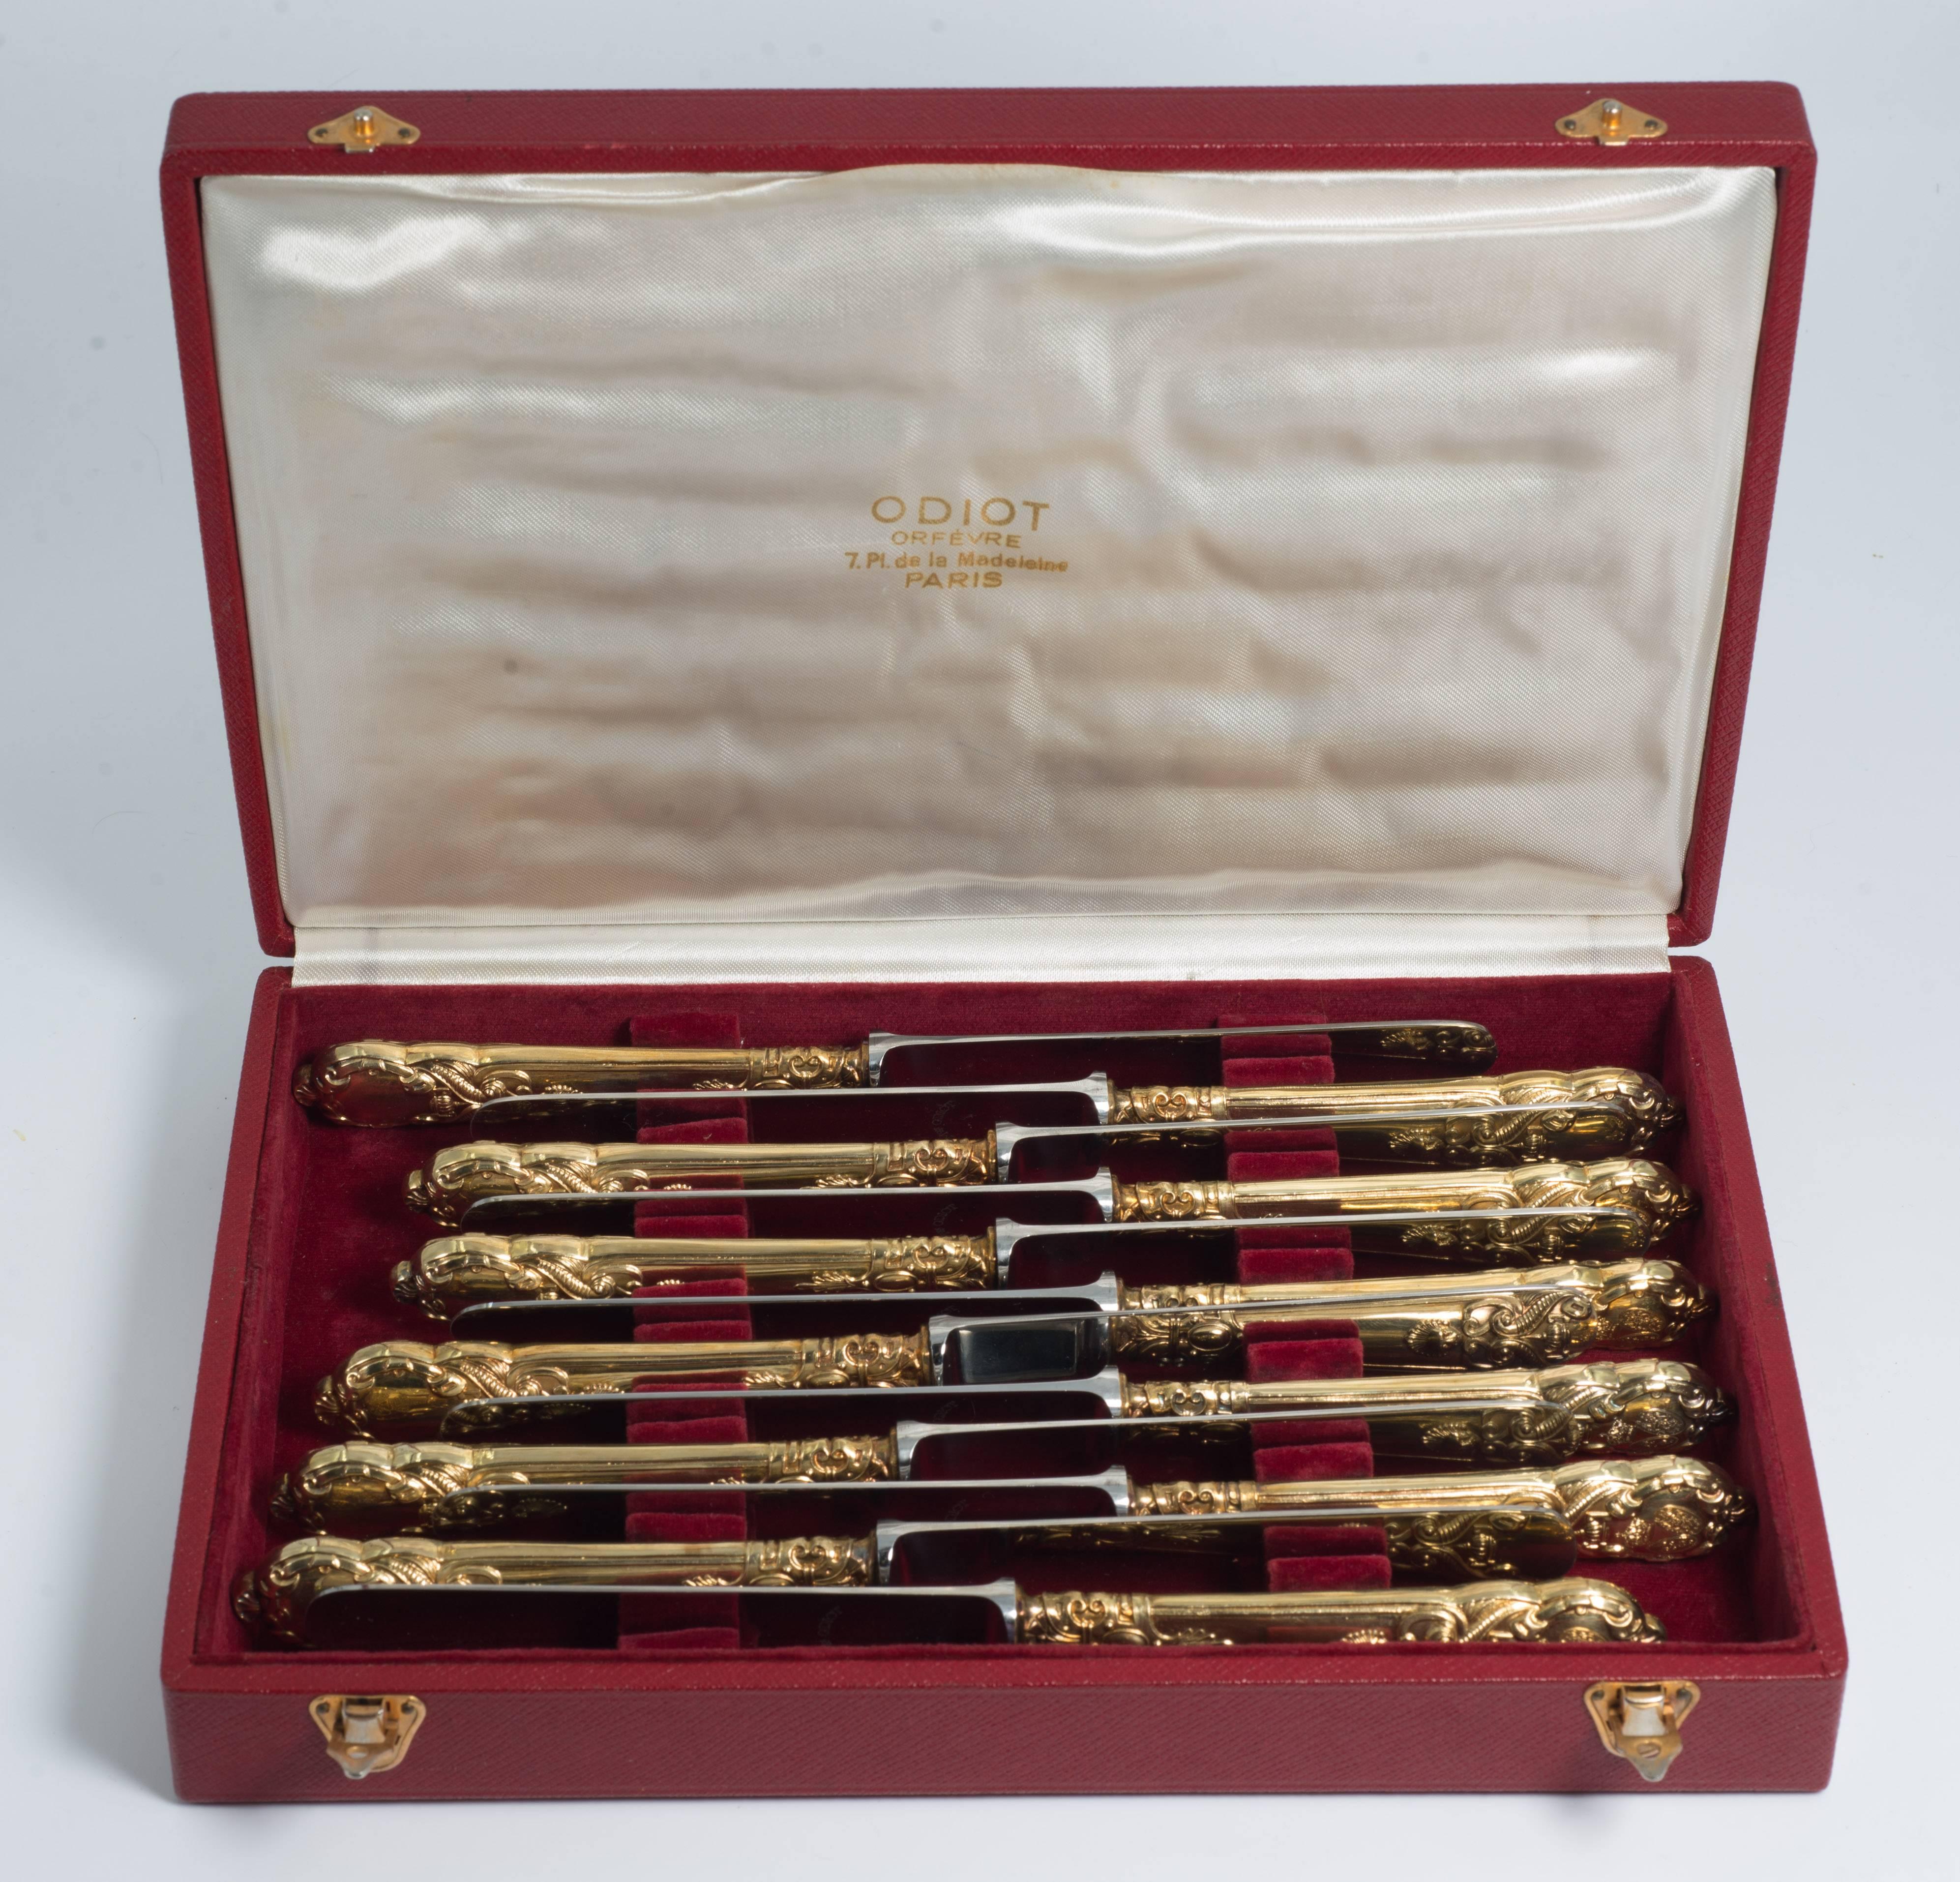 An original boxed presentation set 12 antique Odiot Paris Royal House of Orange and Bourbon armorial engraved gilt presentation knives.
The 12 knife handles are engraved with the coat-of-arms of the House of Orange-Nassau and the  House of